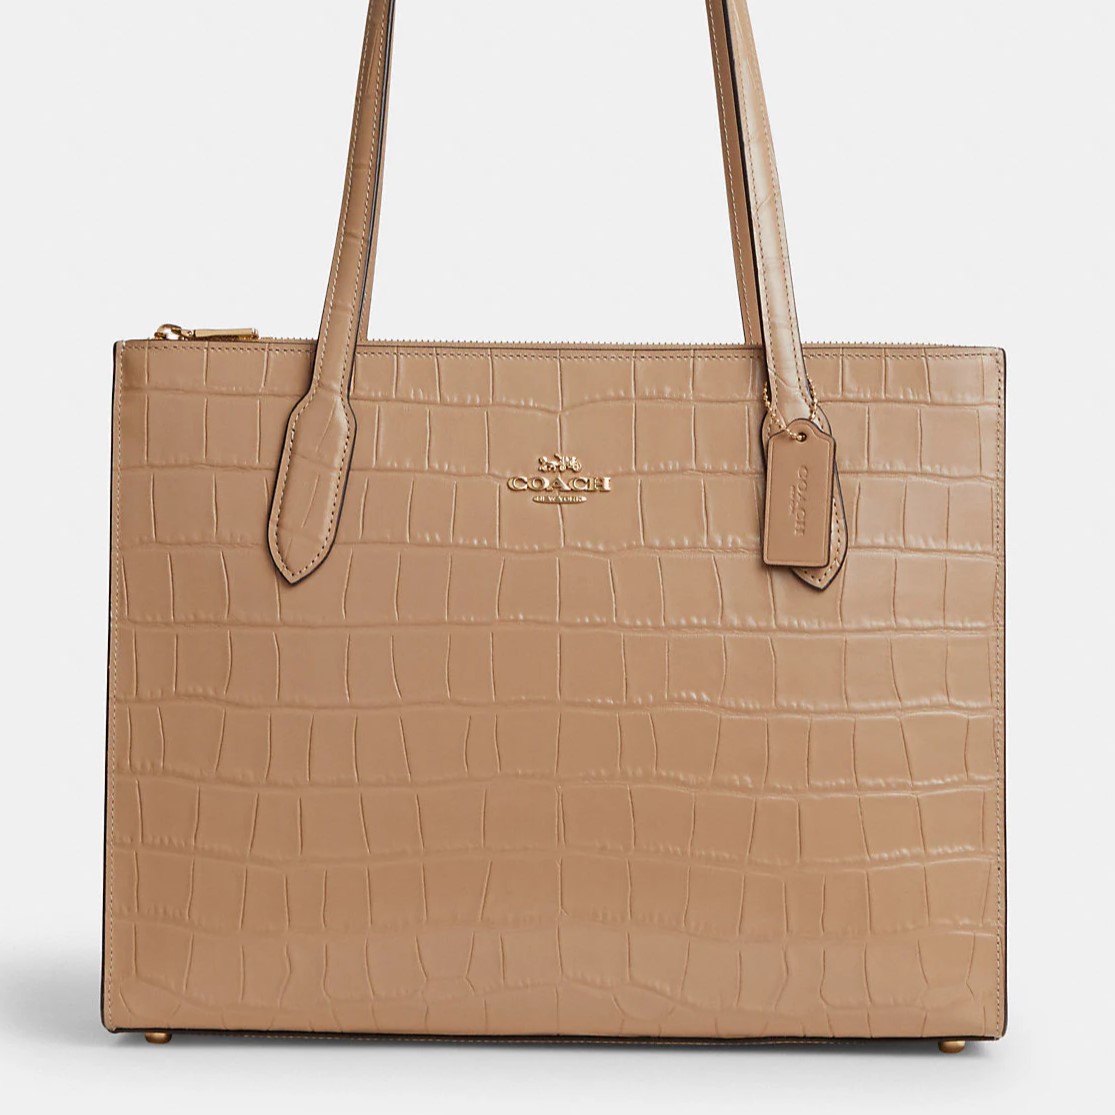 TÚI COACH NỮ NINA TOTE CROCODILE-EMBOSSED LEATHER AND SMOOTH LEATHER BAG IN GOLD TAUPE CL654 3